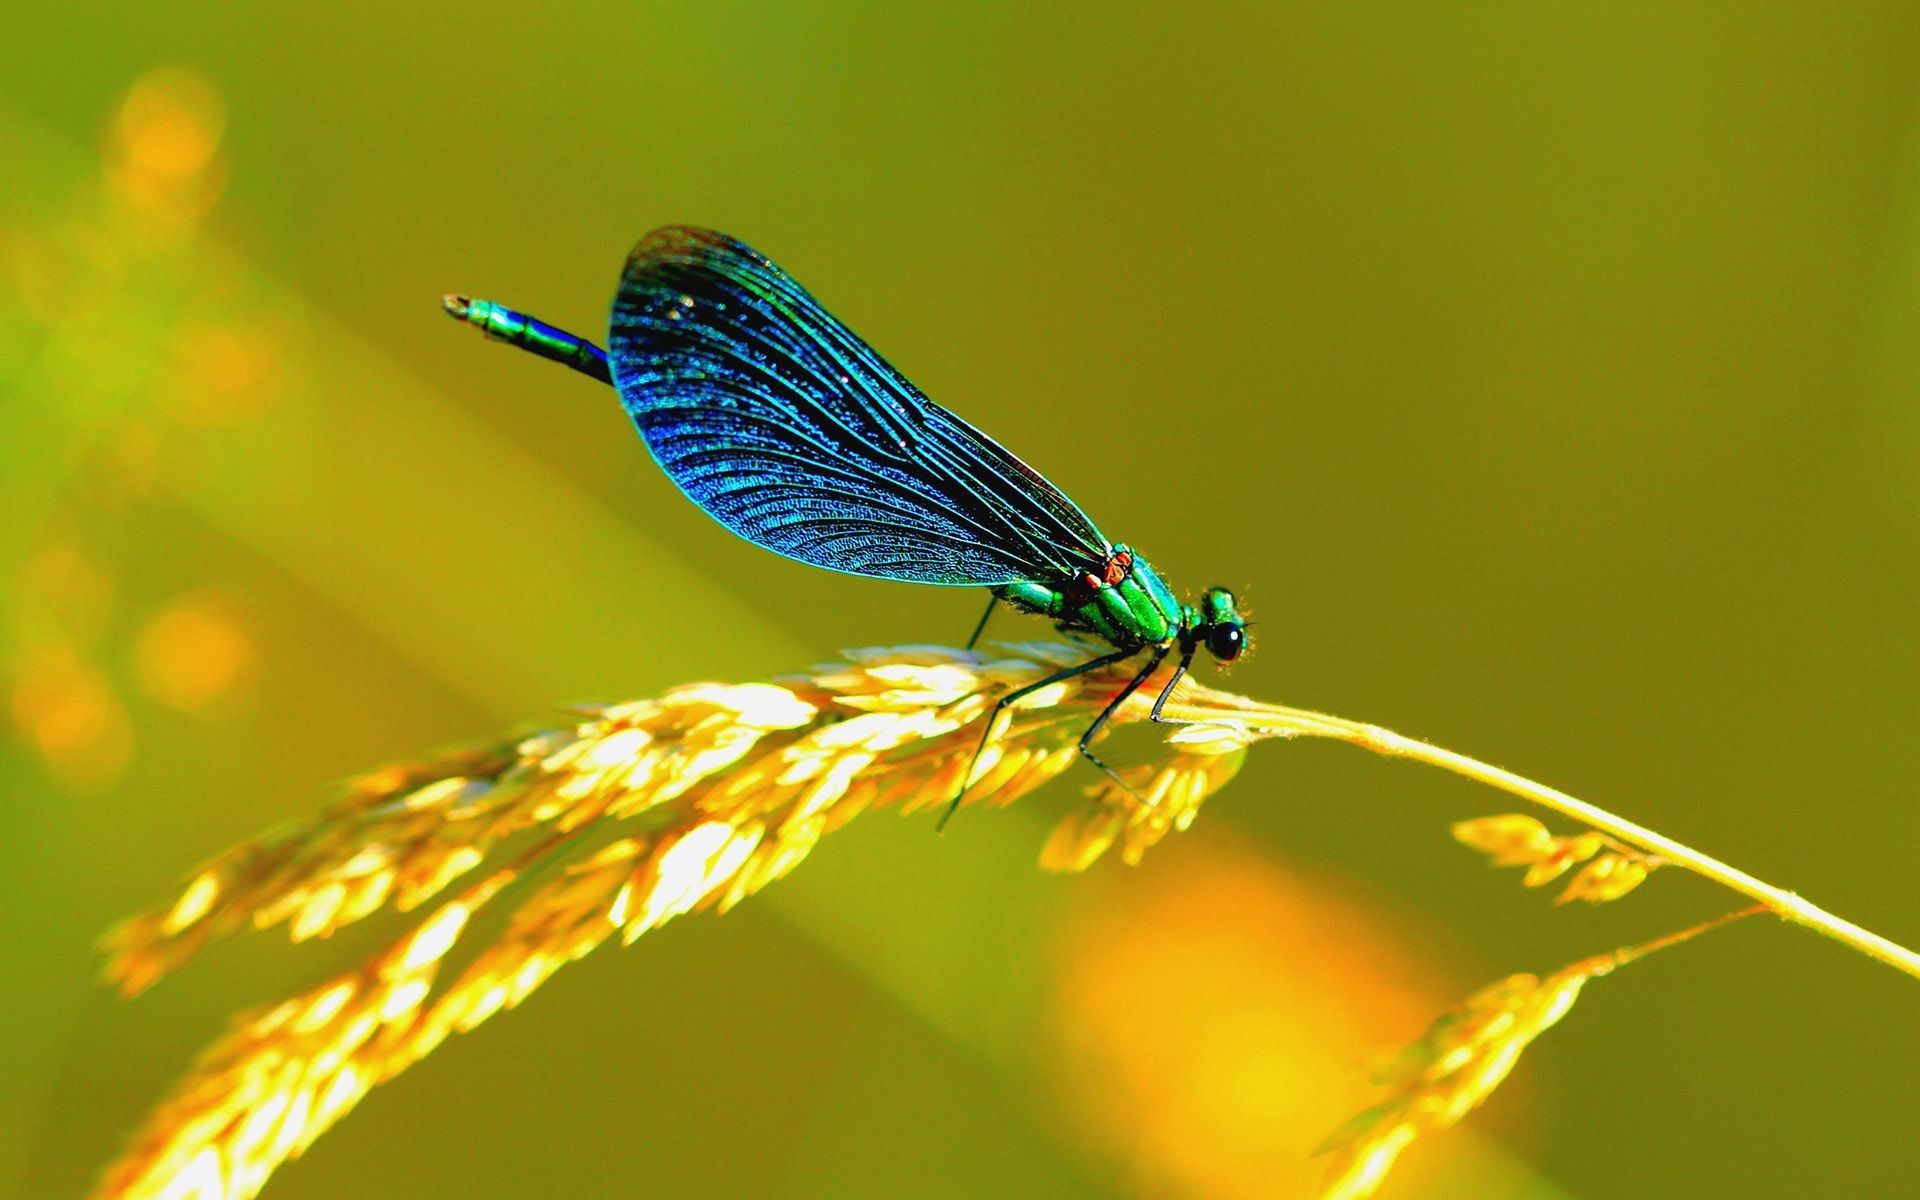 dragonfly hd wallpapers on free dragonfly wallpaper